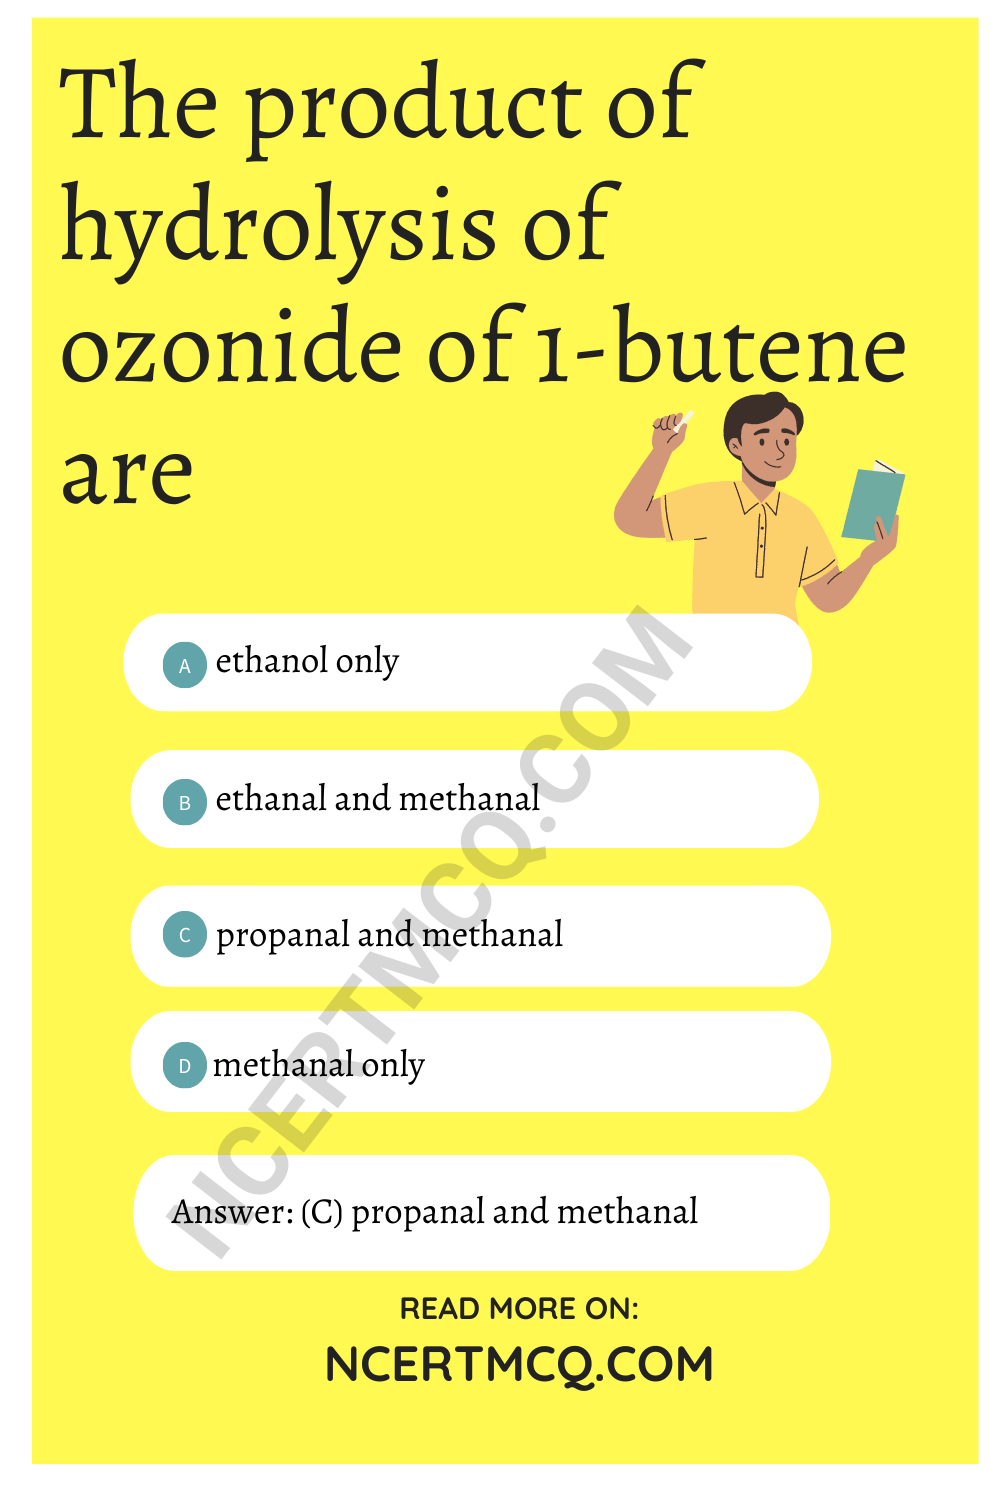 The product of hydrolysis of ozonide of 1-butene are